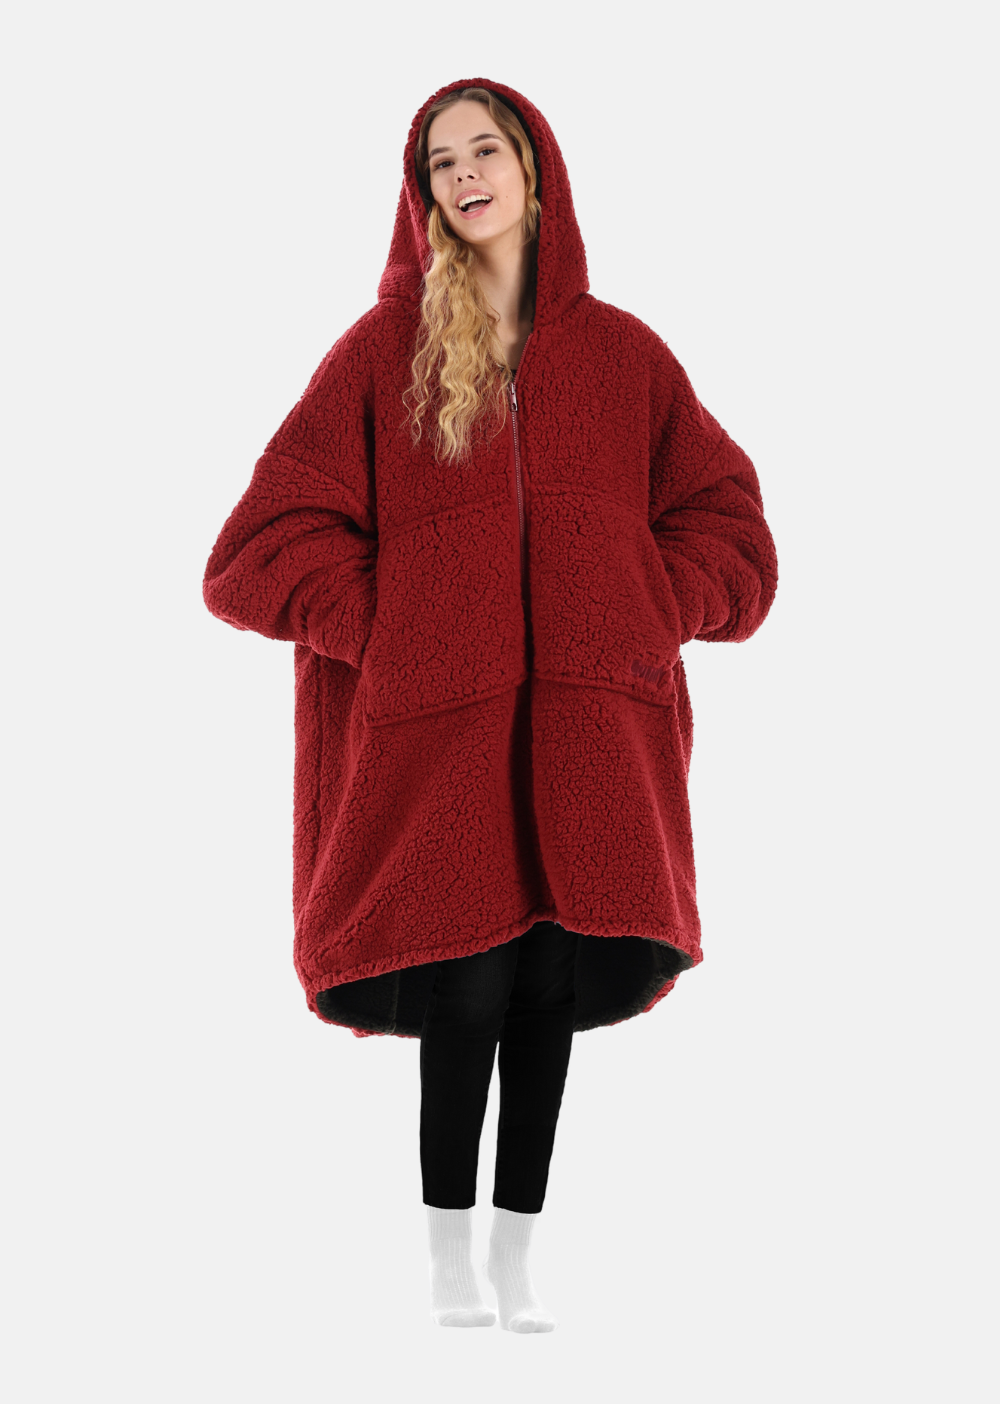 The Comfy, Perfect for Cool Fall Days and Cozy Winter Days - 78832